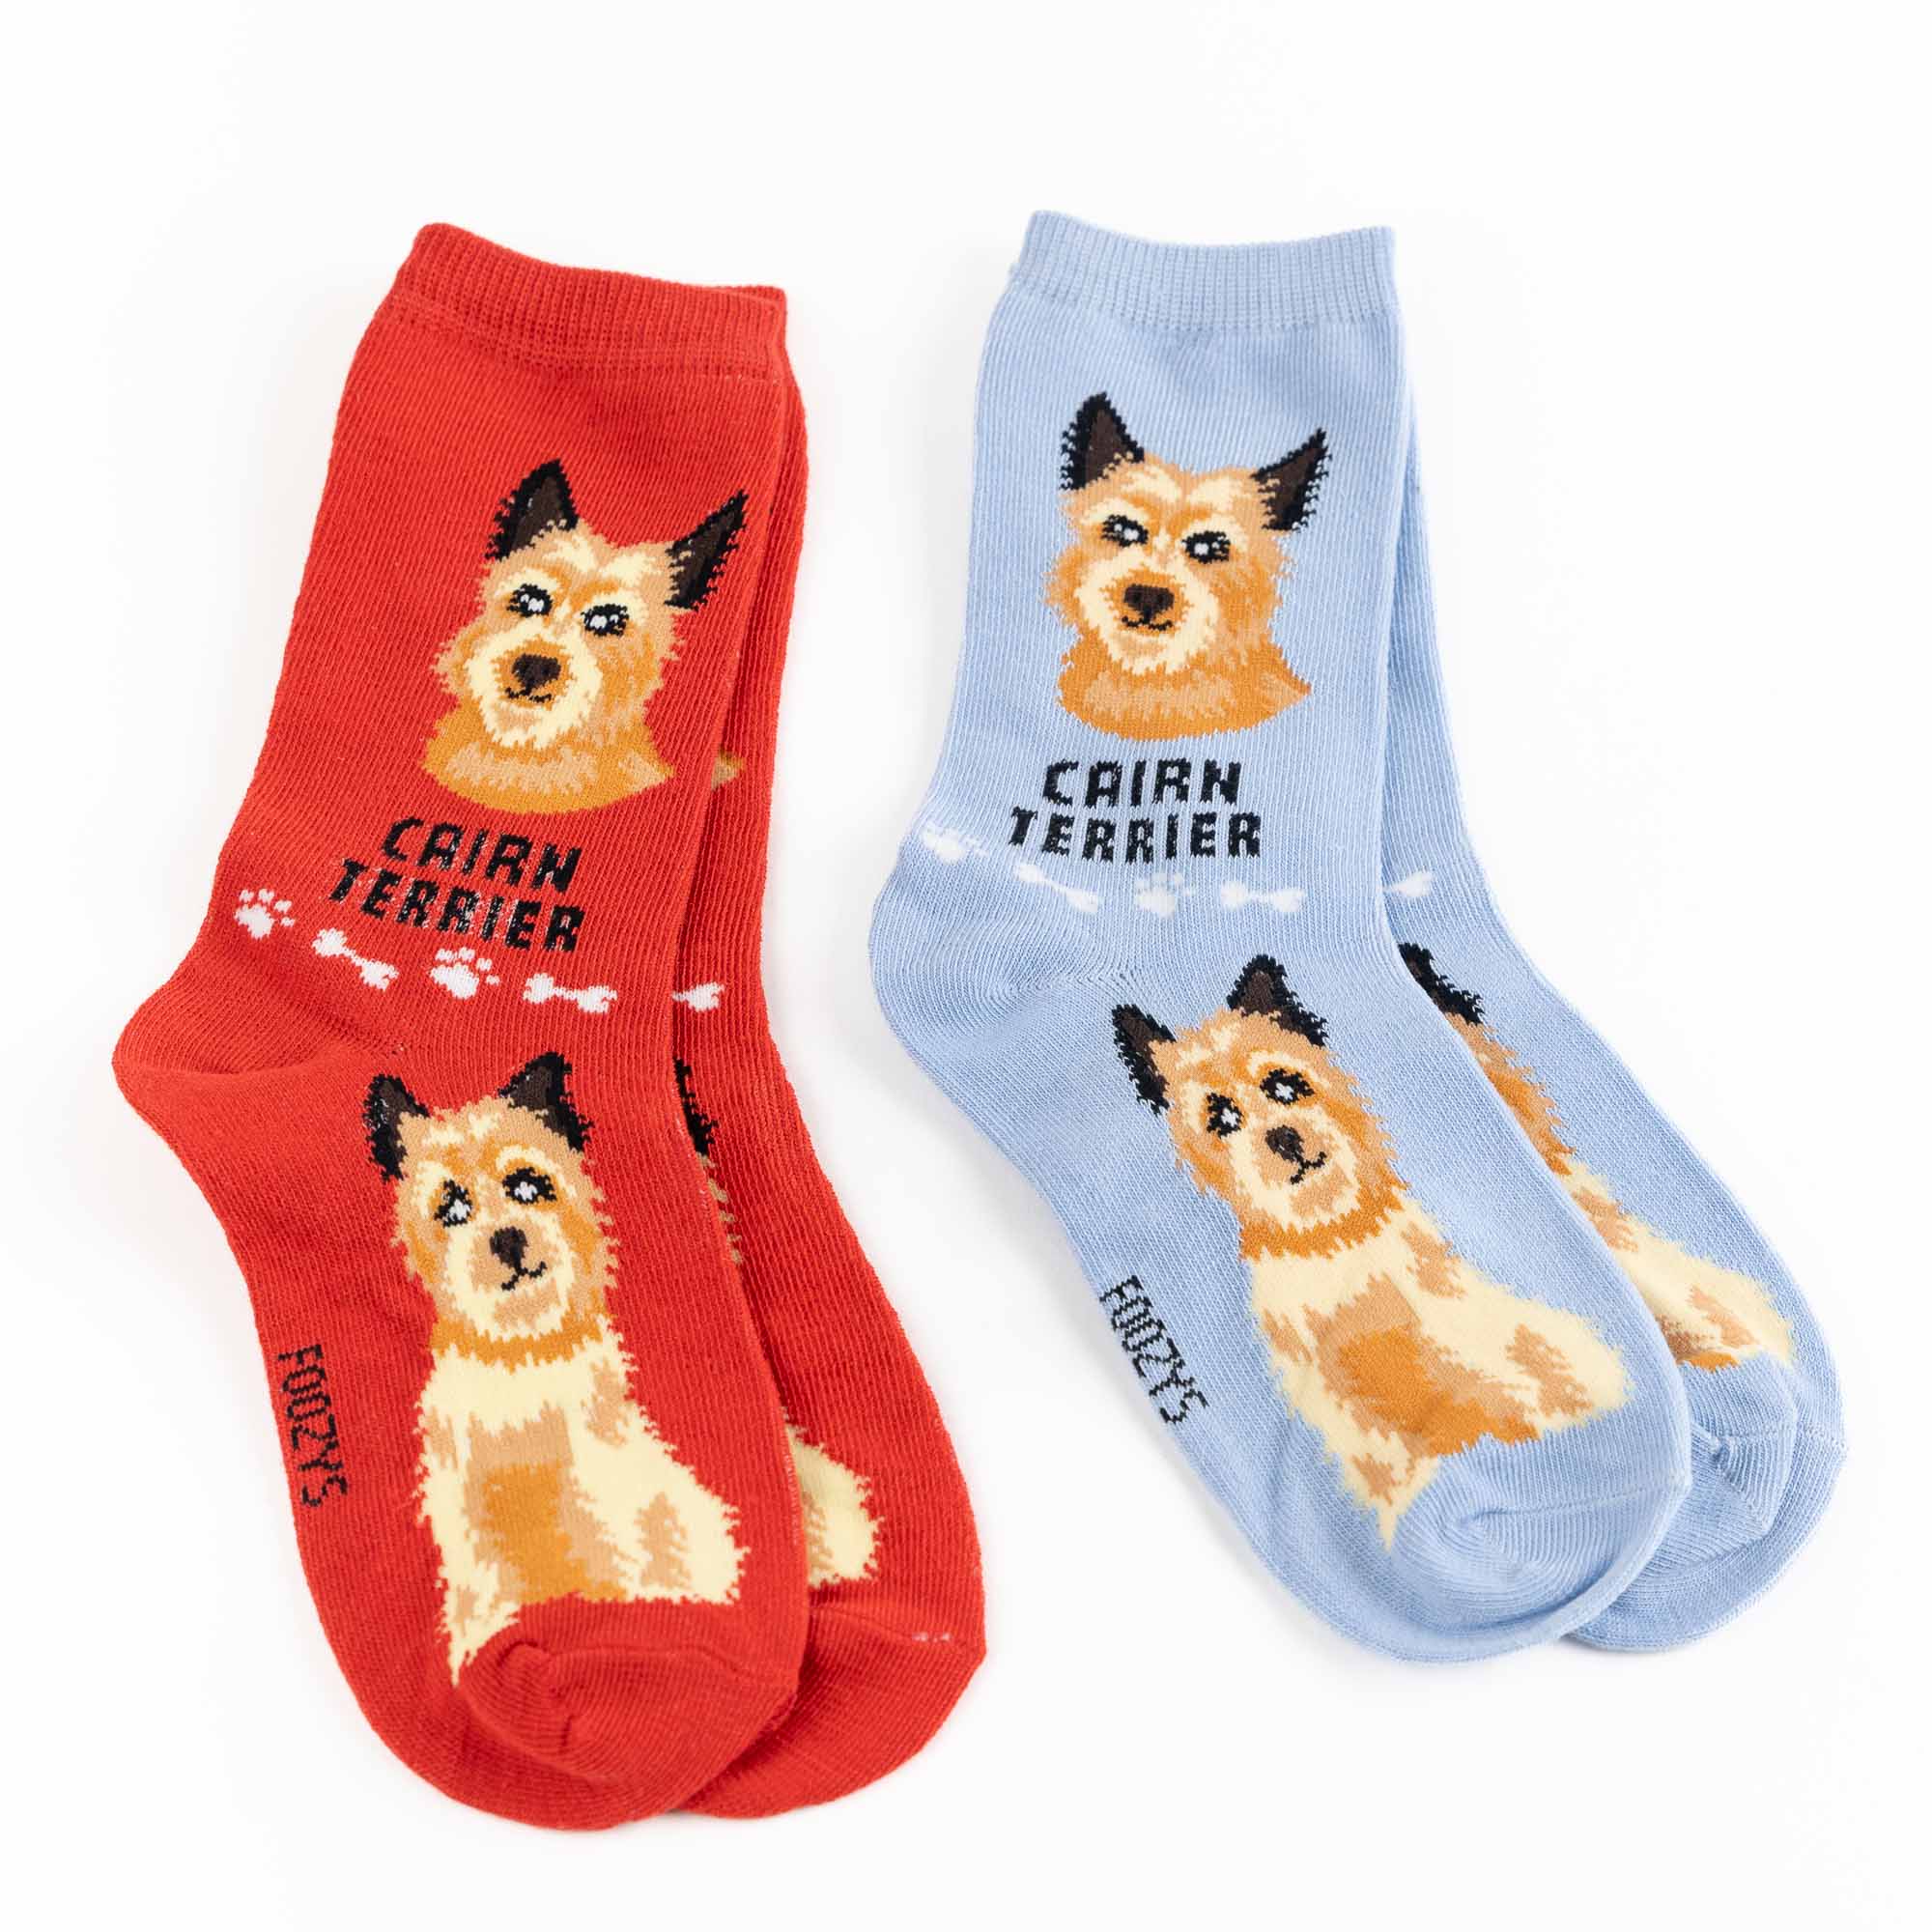 My Favorite Dog Breed Socks ❤️ Cairn Terrier Breed Dog Sock - 2 Set Collection